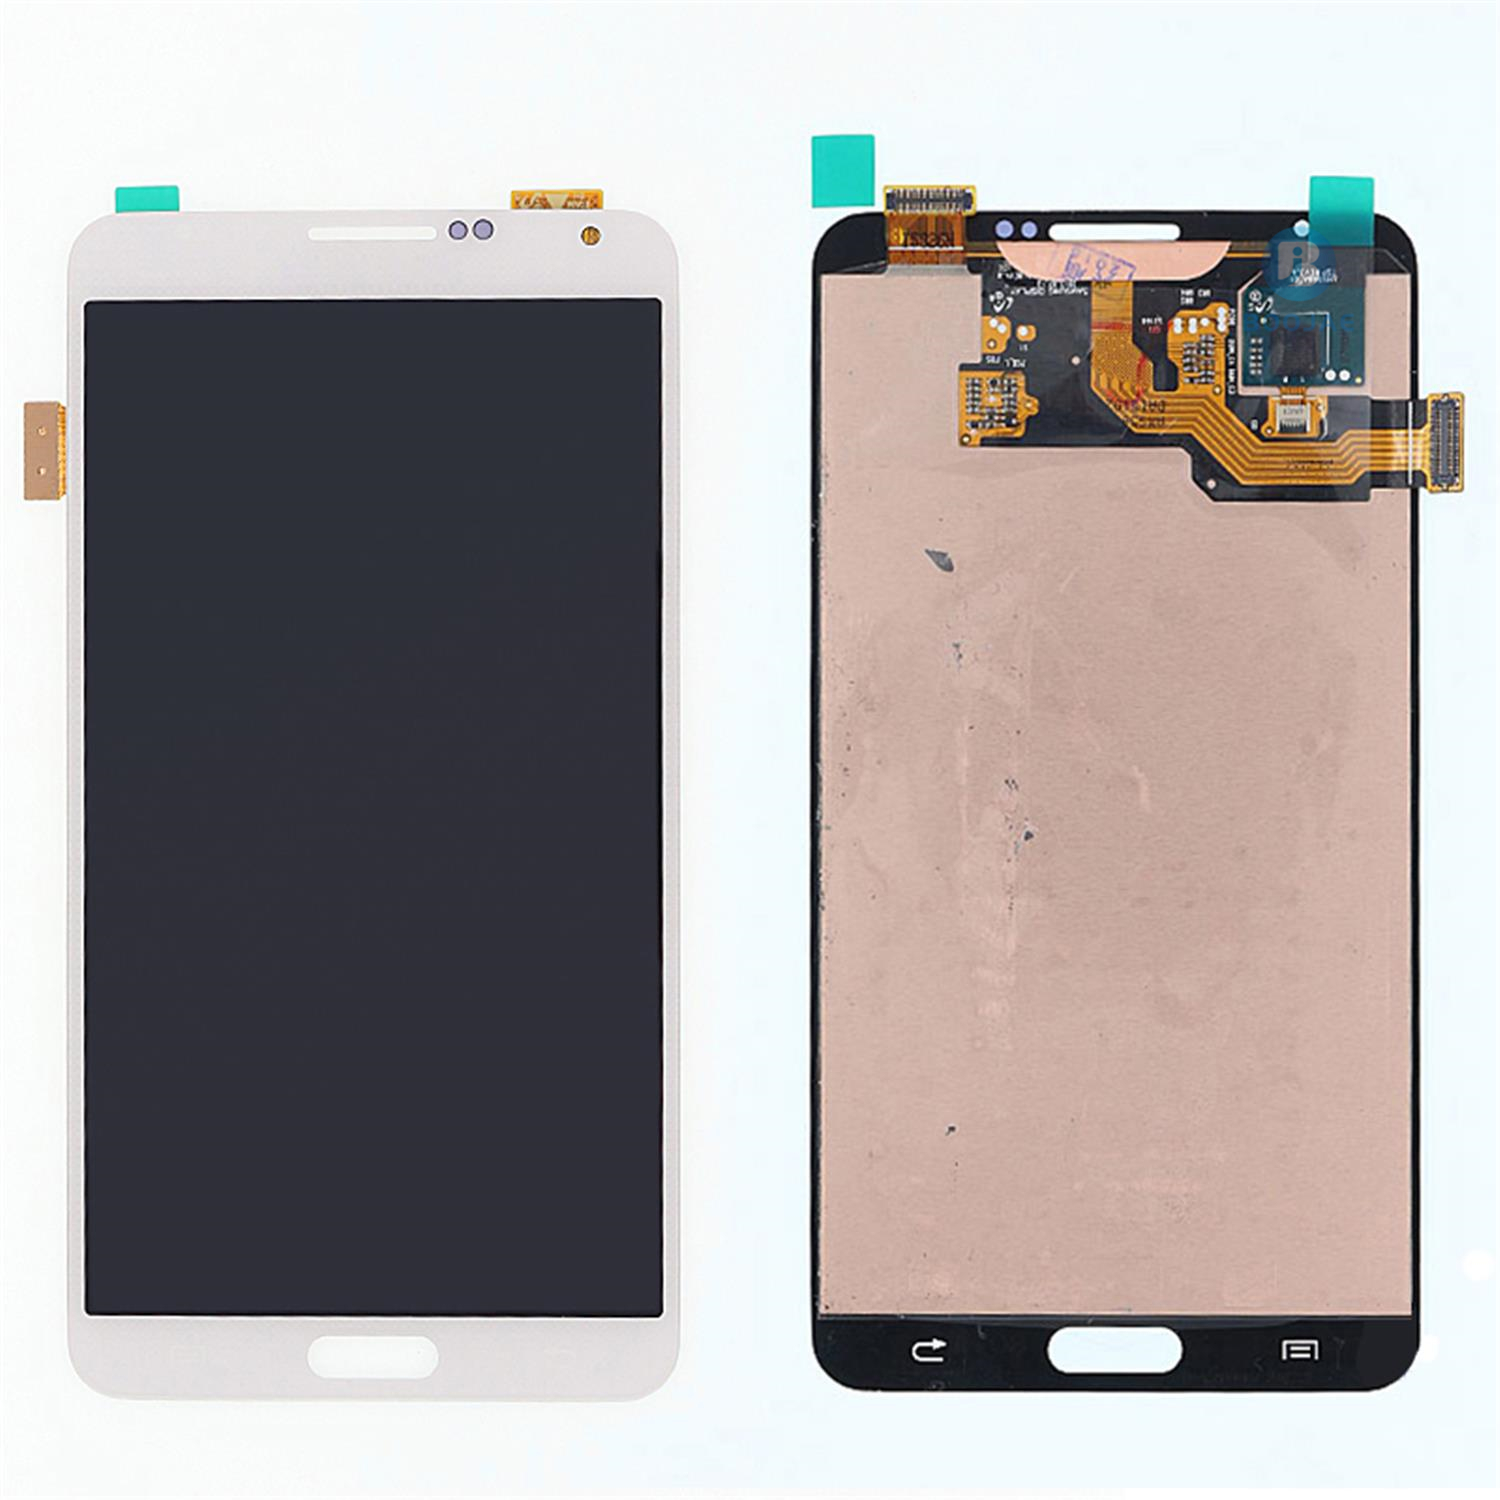 Samsung Galaxy Note 3 LCD Screen Display and Touch Panel Digitizer Assembly Replacement